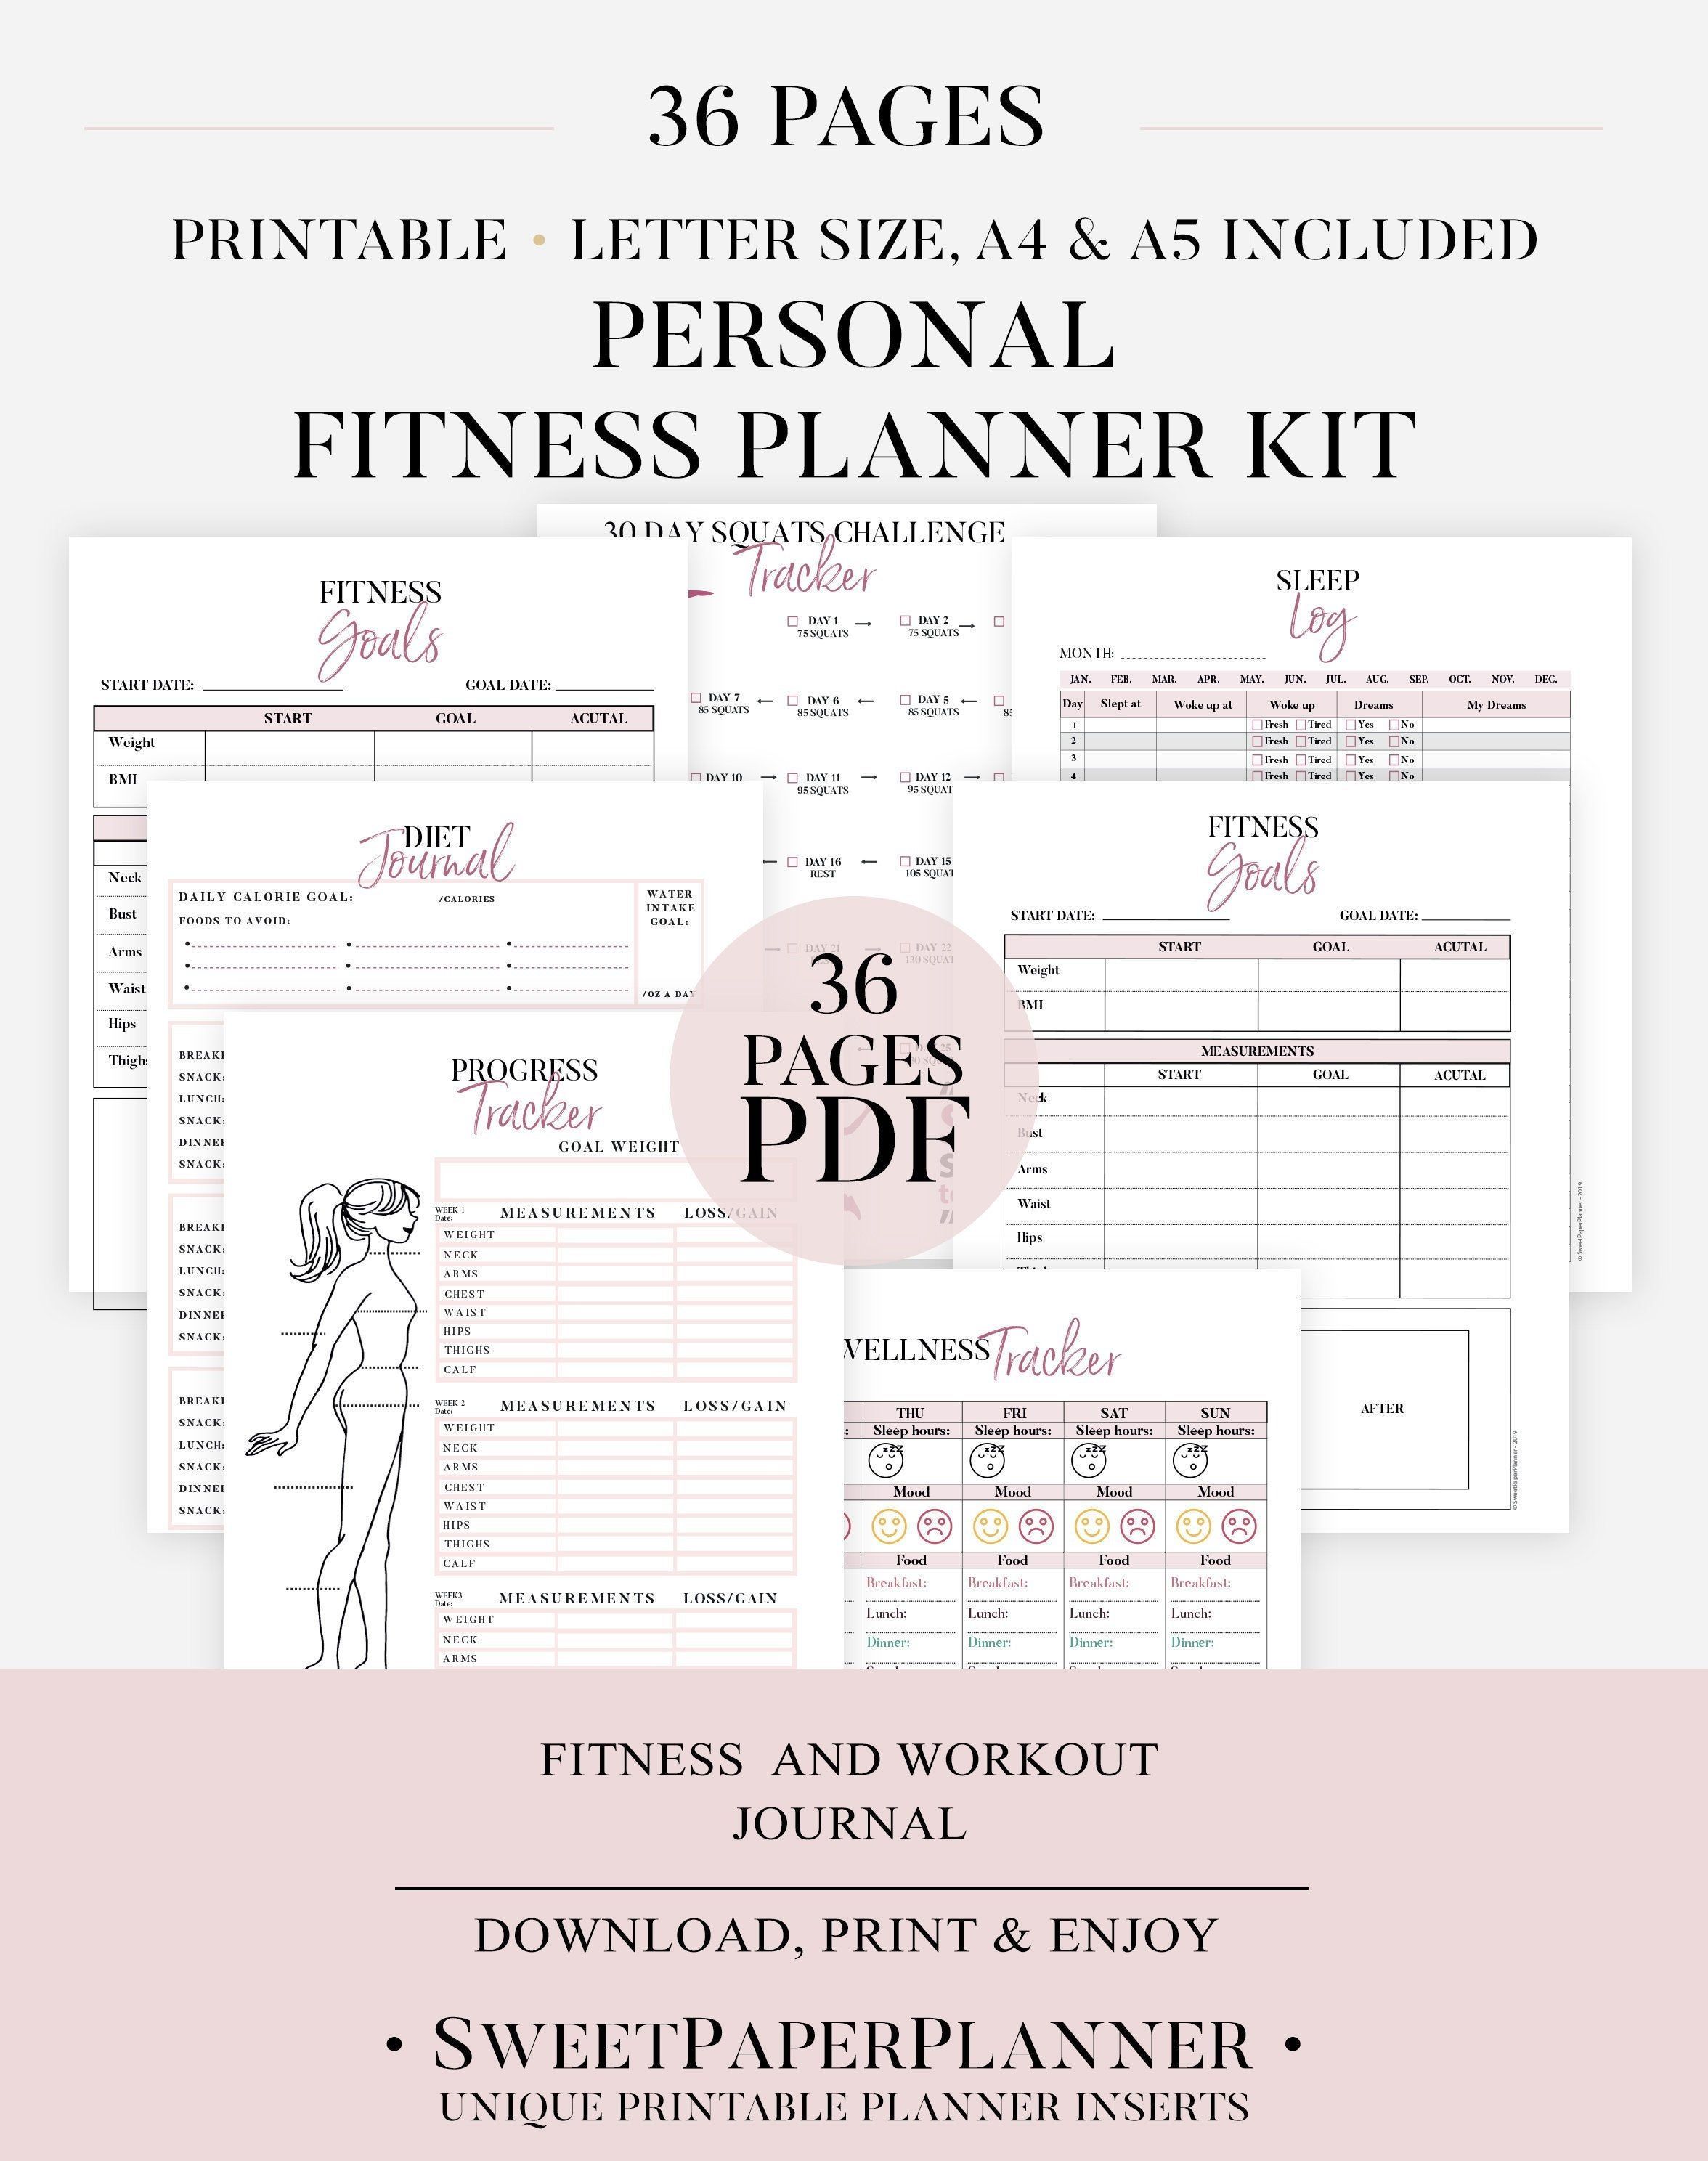 Ultimate Fitness Planner, Printable Health planner Bundle, Fitness Journal, Workout Log, Food And Exercise Tracker, 30 Day Squats Challenge - Ultimate Fitness Planner, Printable Health planner Bundle, Fitness Journal, Workout Log, Food And Exercise Tracker, 30 Day Squats Challenge -   16 fitness Journal beginners ideas